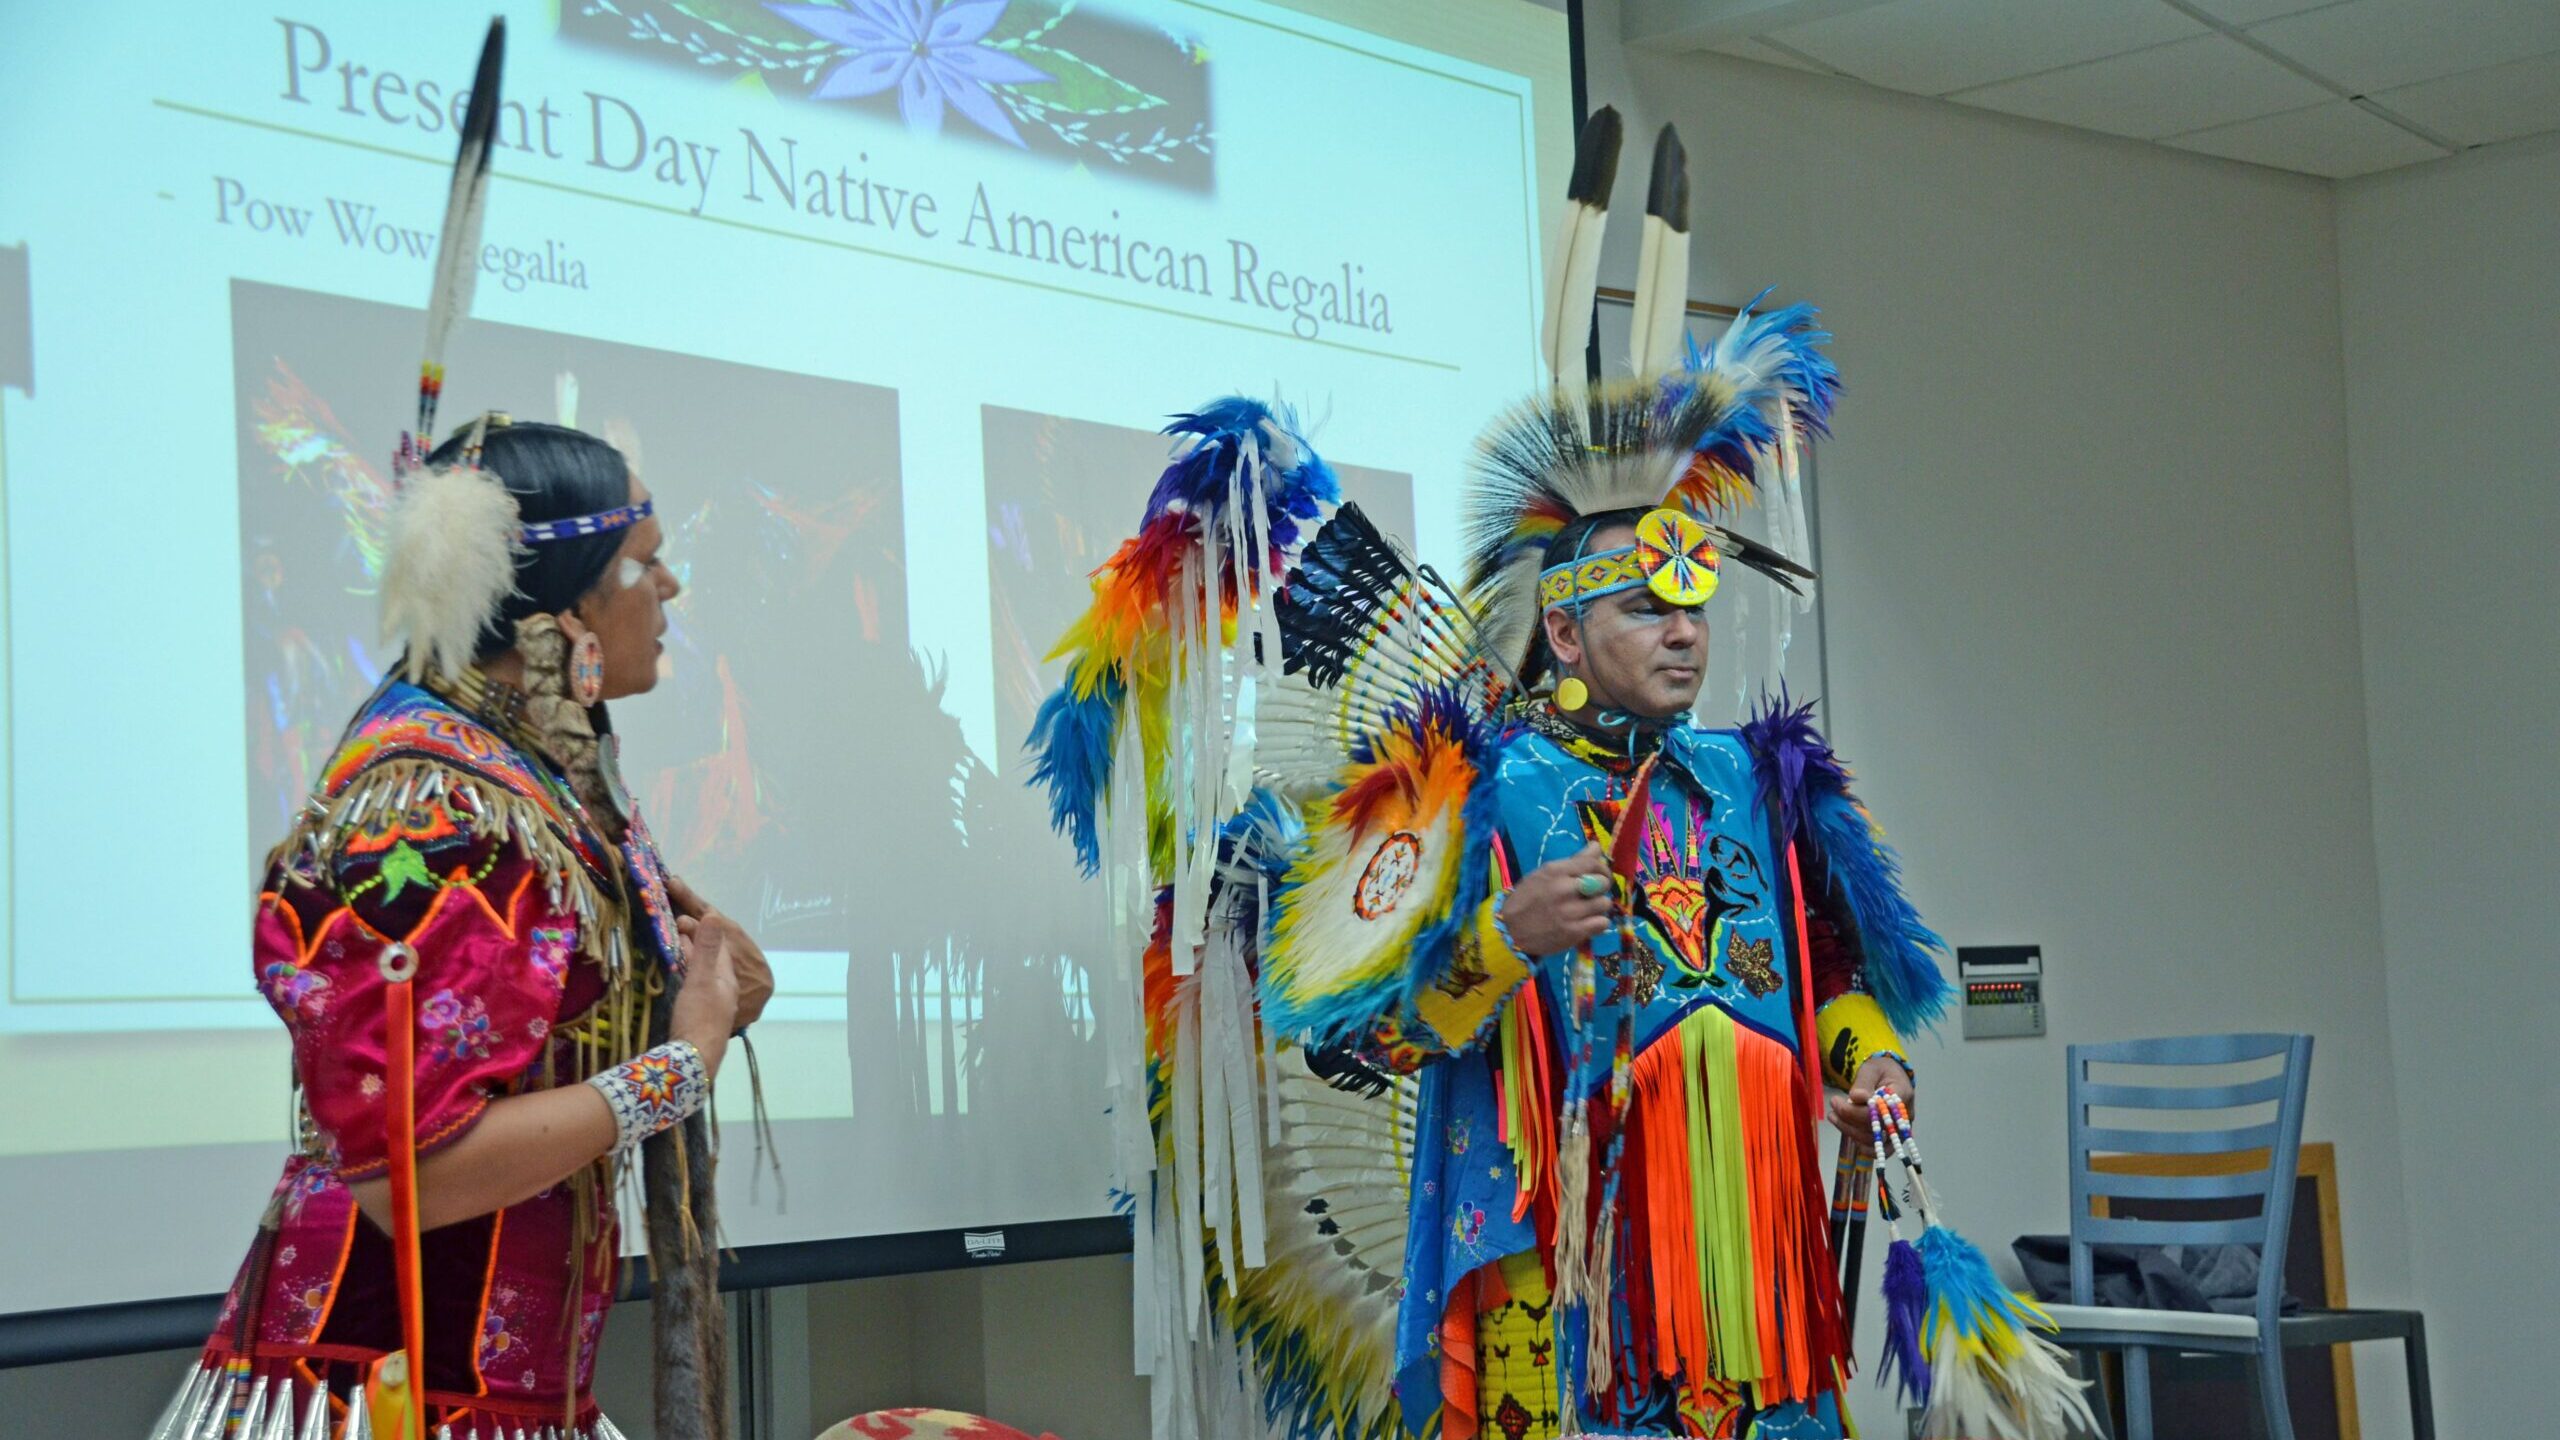 Michelle Reed and James Cohen presenting on traditional Native American Regalia.